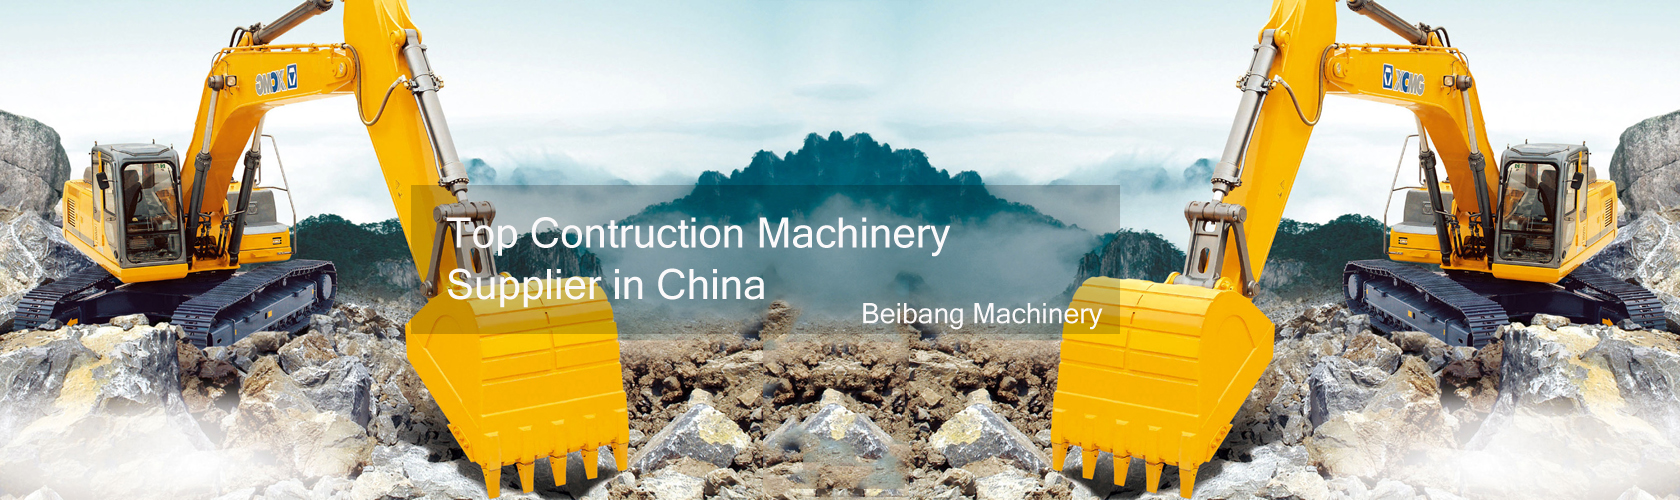 Top Construction Machinery Supplier in China